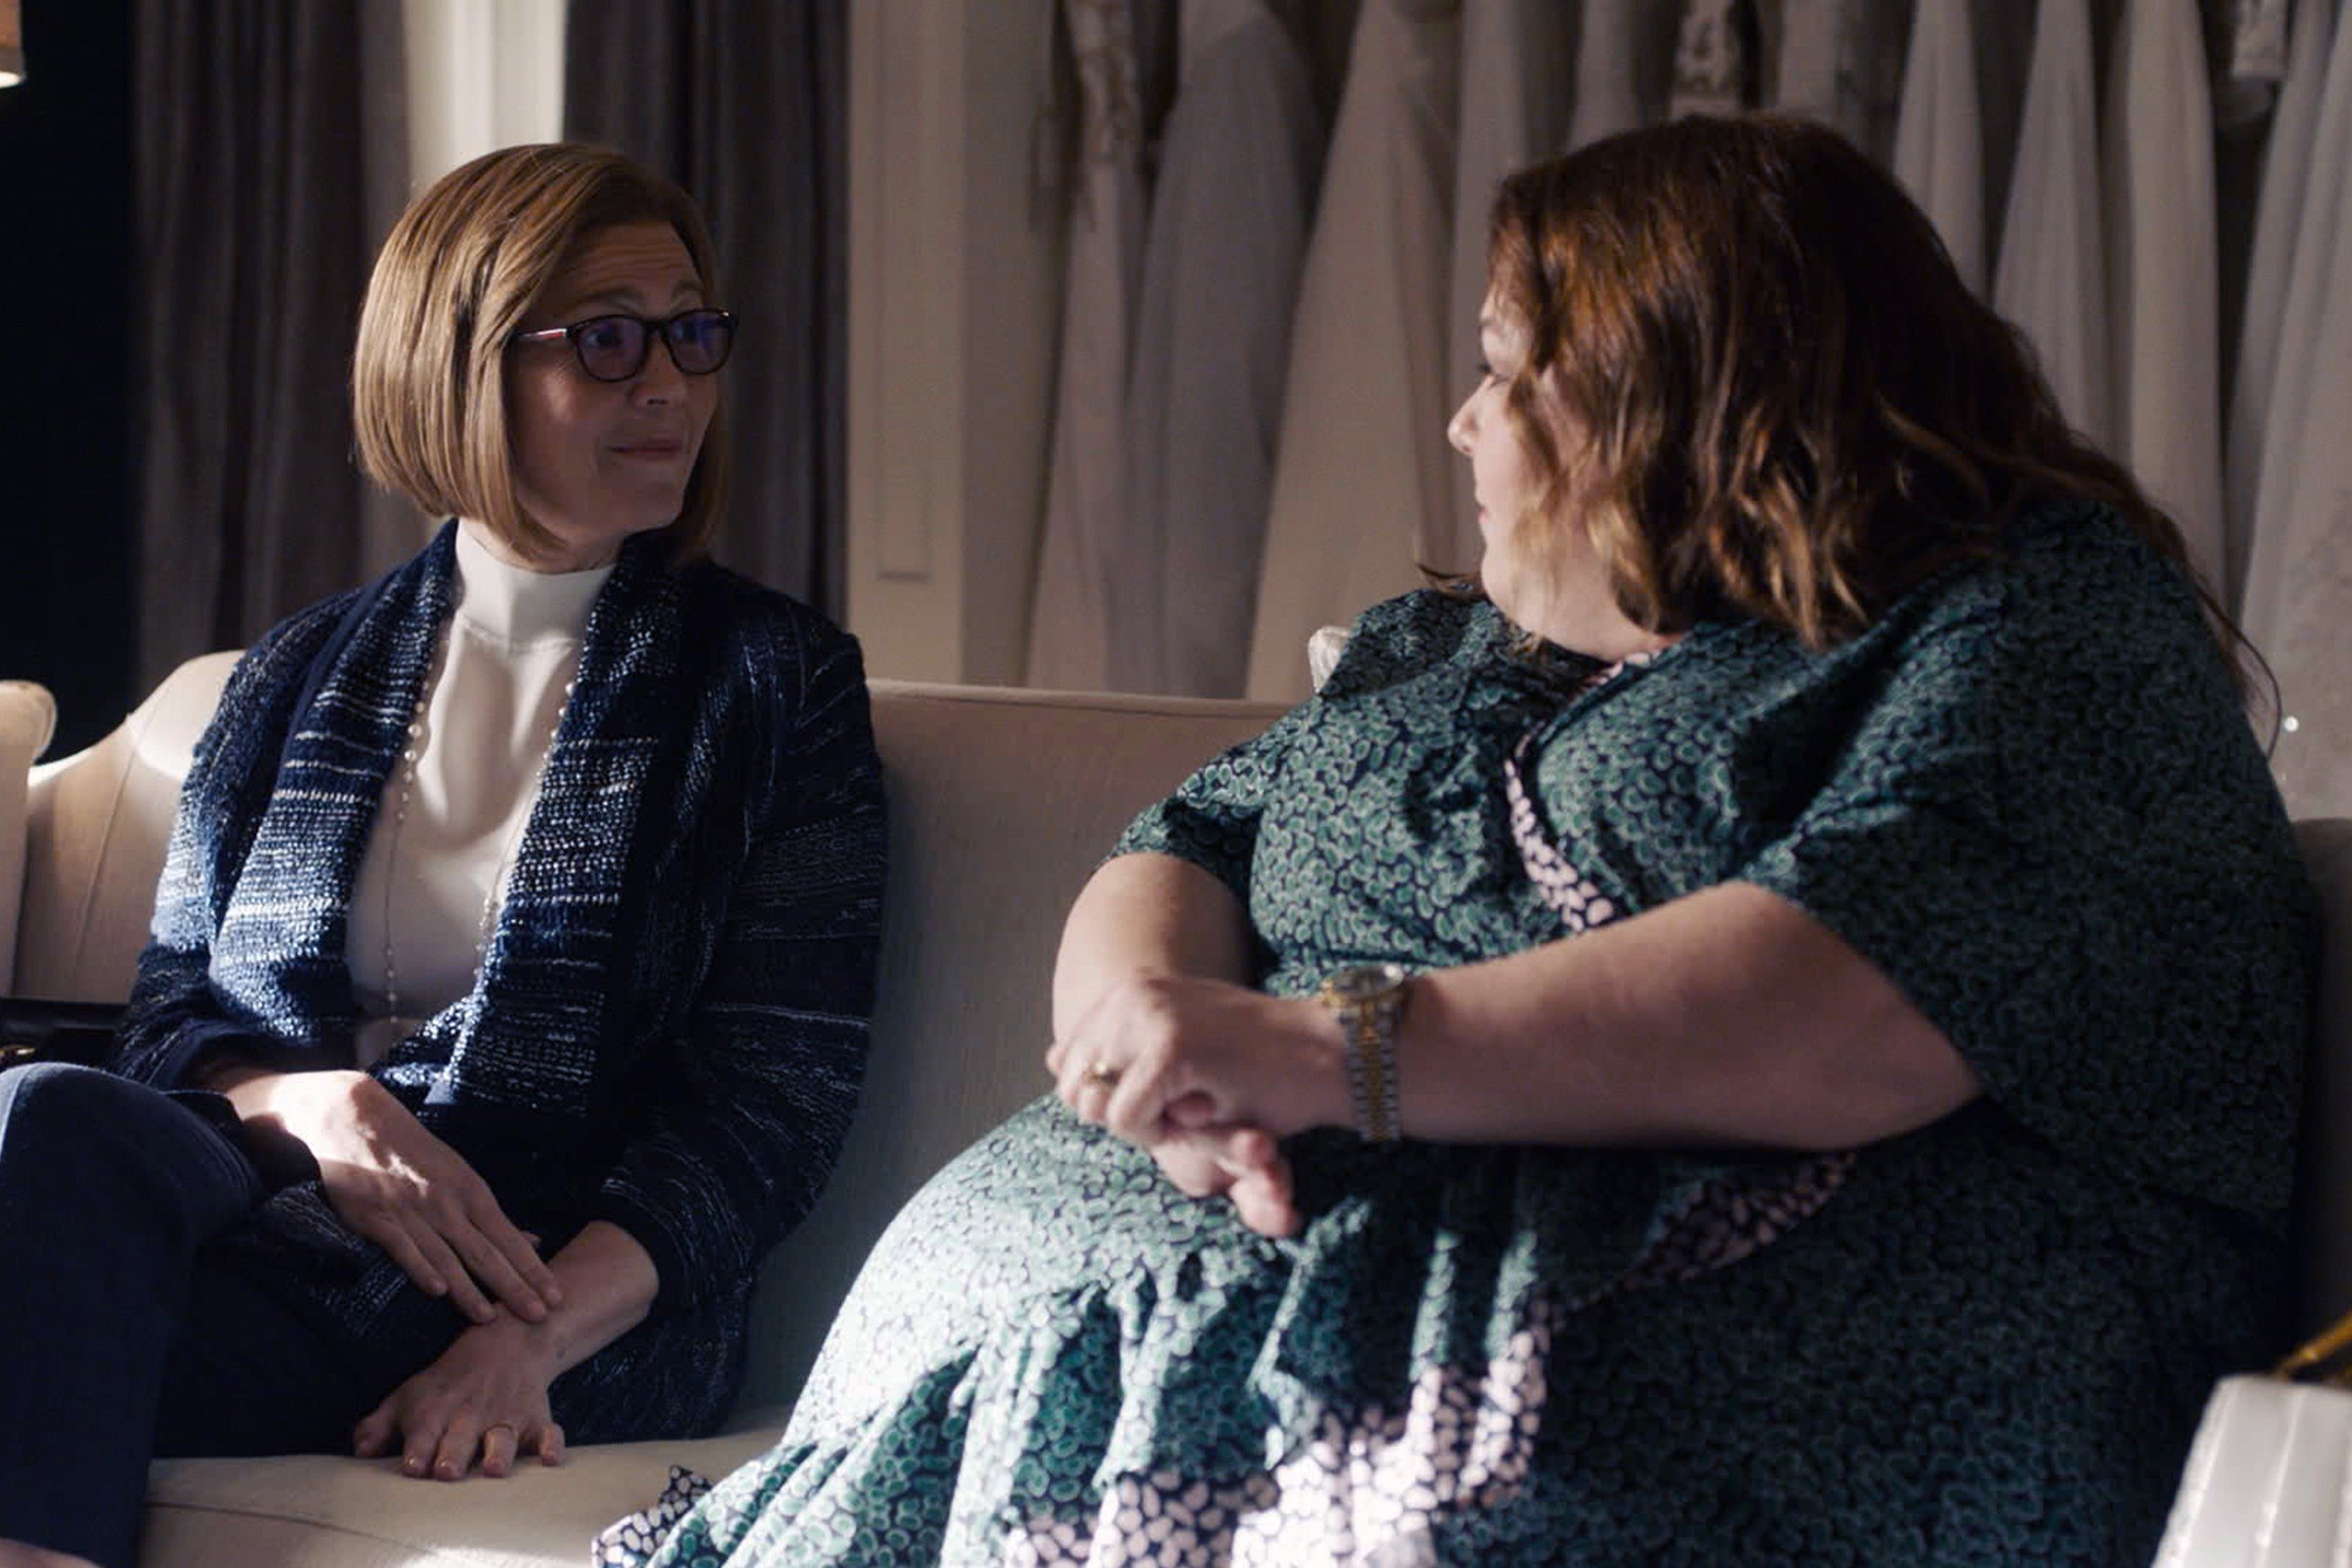 'This Is Us' stars Mandy Moore and Chrissy Metz, in character as Rebecca and Kate, share a scene. Rebecca wears a dark blue cardigan over a white turtleneck and dark pants. Kate wears a green floral dress.